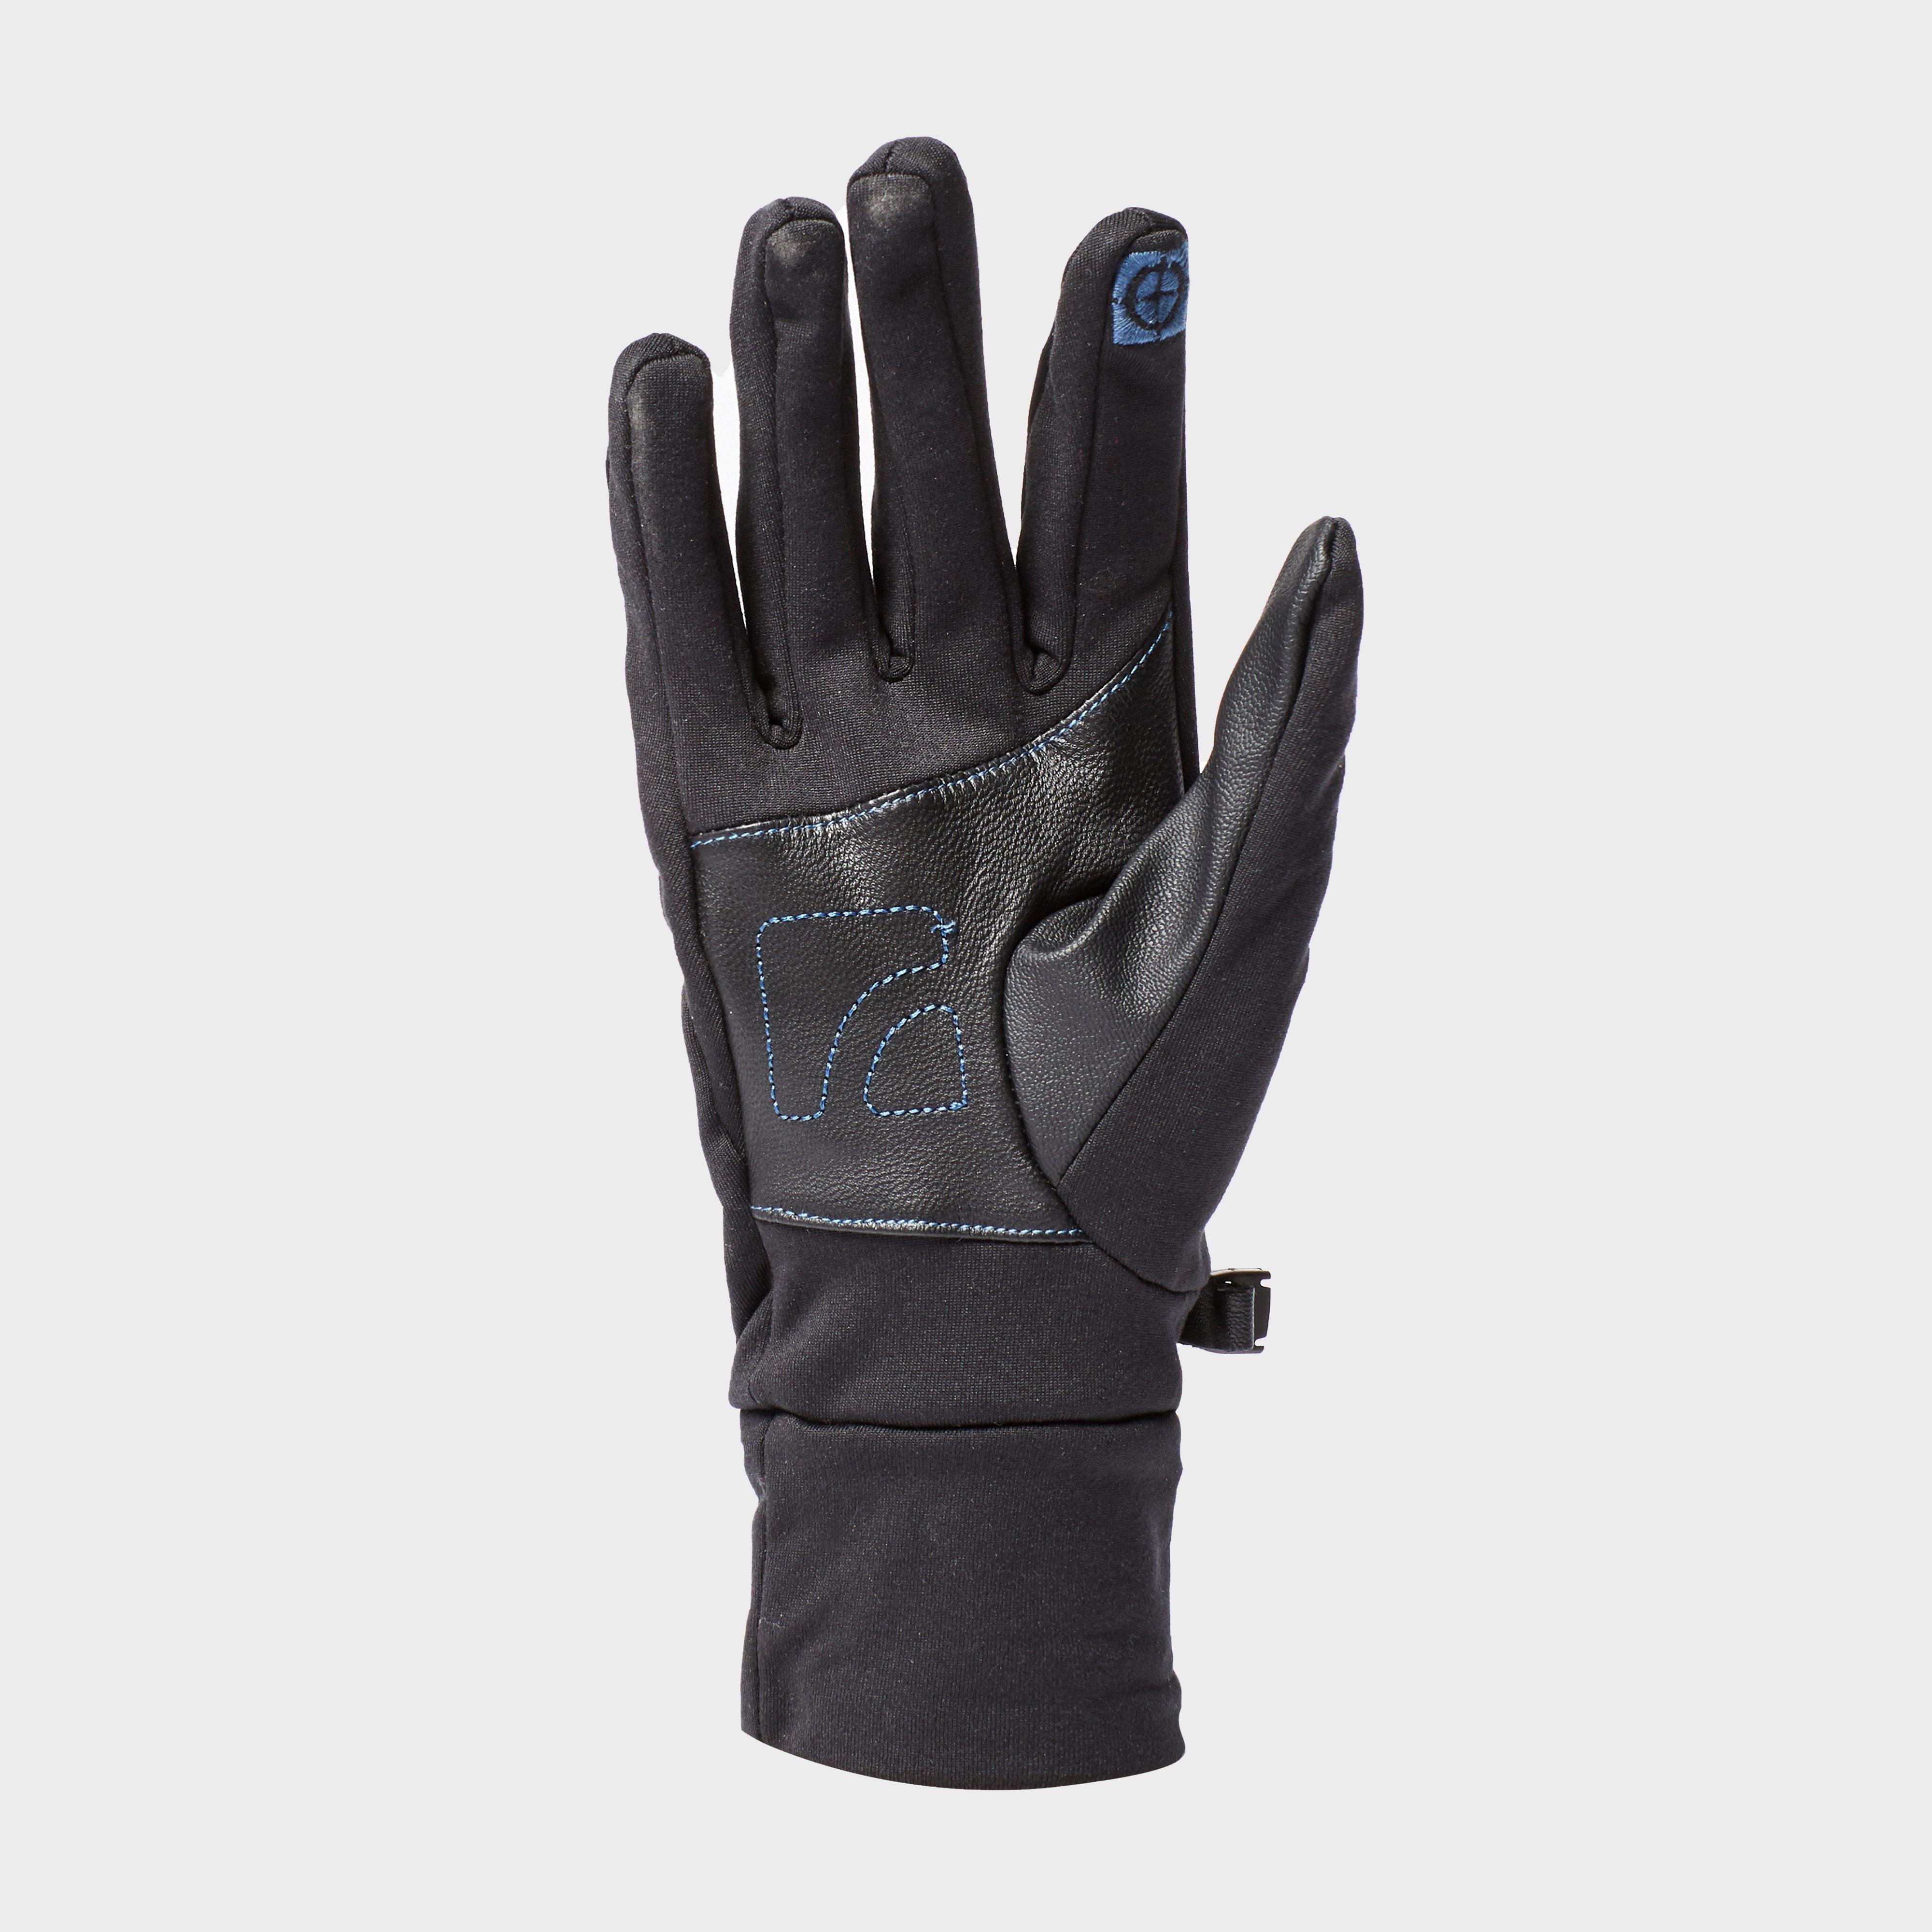 Trekmates Men's Ulscarf Gloves Review